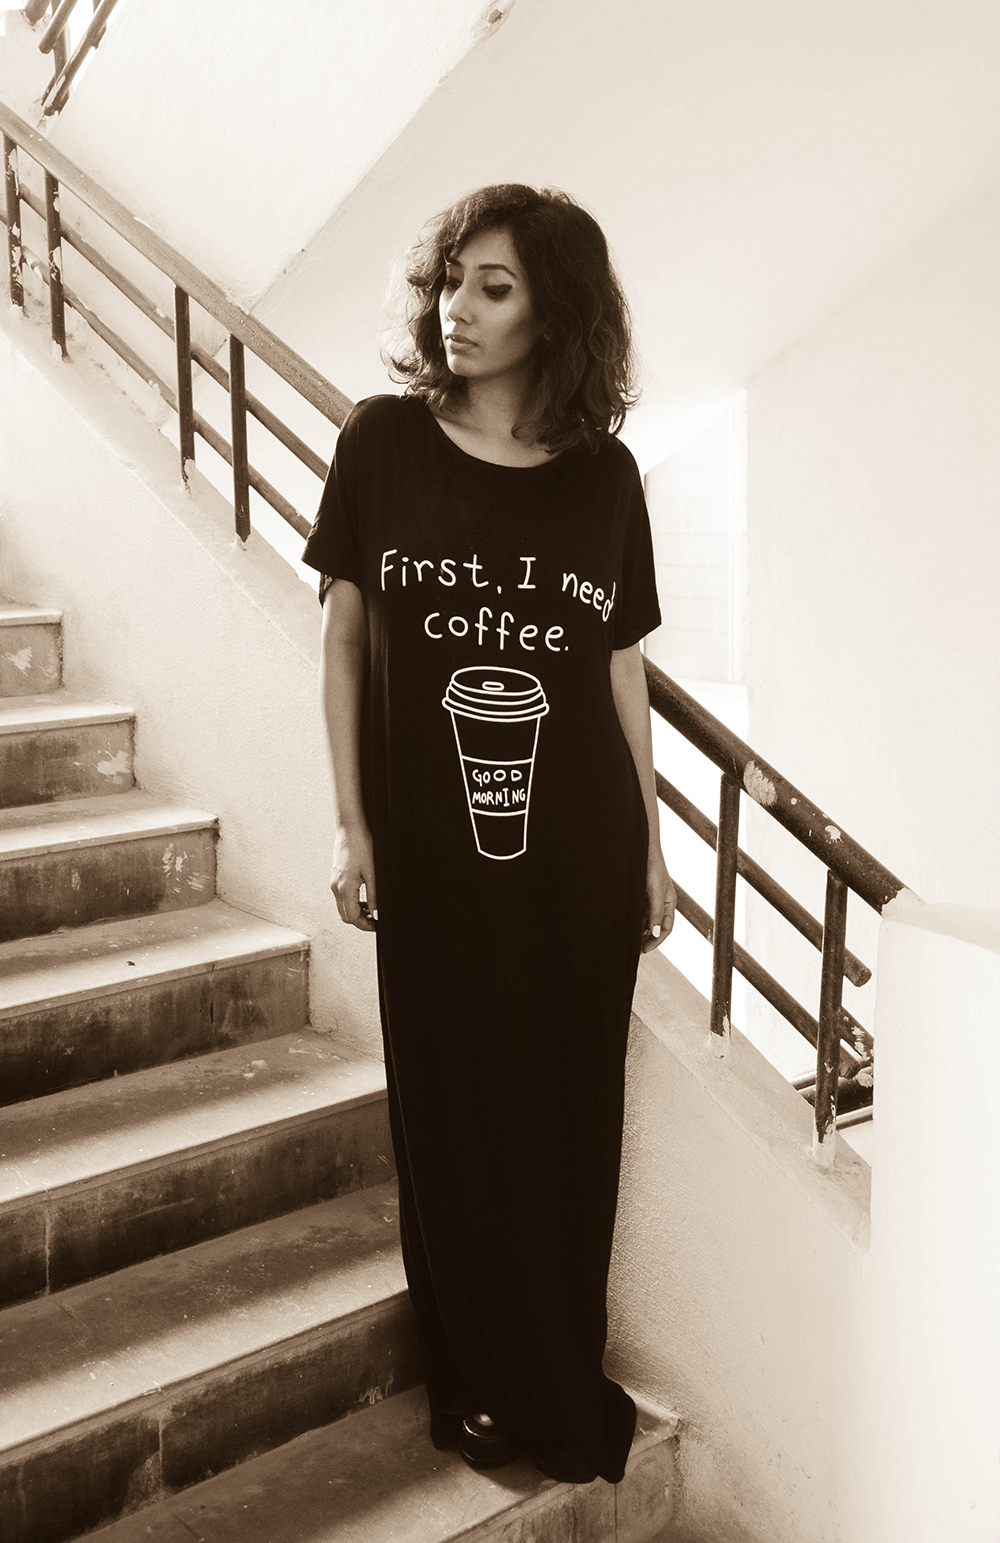  Lookbook ; Black Maxi ; Shein ; Morning Coffee ; Black ; Dress ; Comfy ; Maxi ; Loungewear ; Outfit ; fashion photography ; Messy hair ; Sunday outfit ; summer fashion ; summer outfit ; spring ; summer 17 ; boho look ; Naznin ; Naznin Suhaer ; dusky; model ; indian blogger ; hyderabad fashion bloggers ; hyderabad bloggers ; hyderabad fashion blogger ; I Dress for the Applause ; 